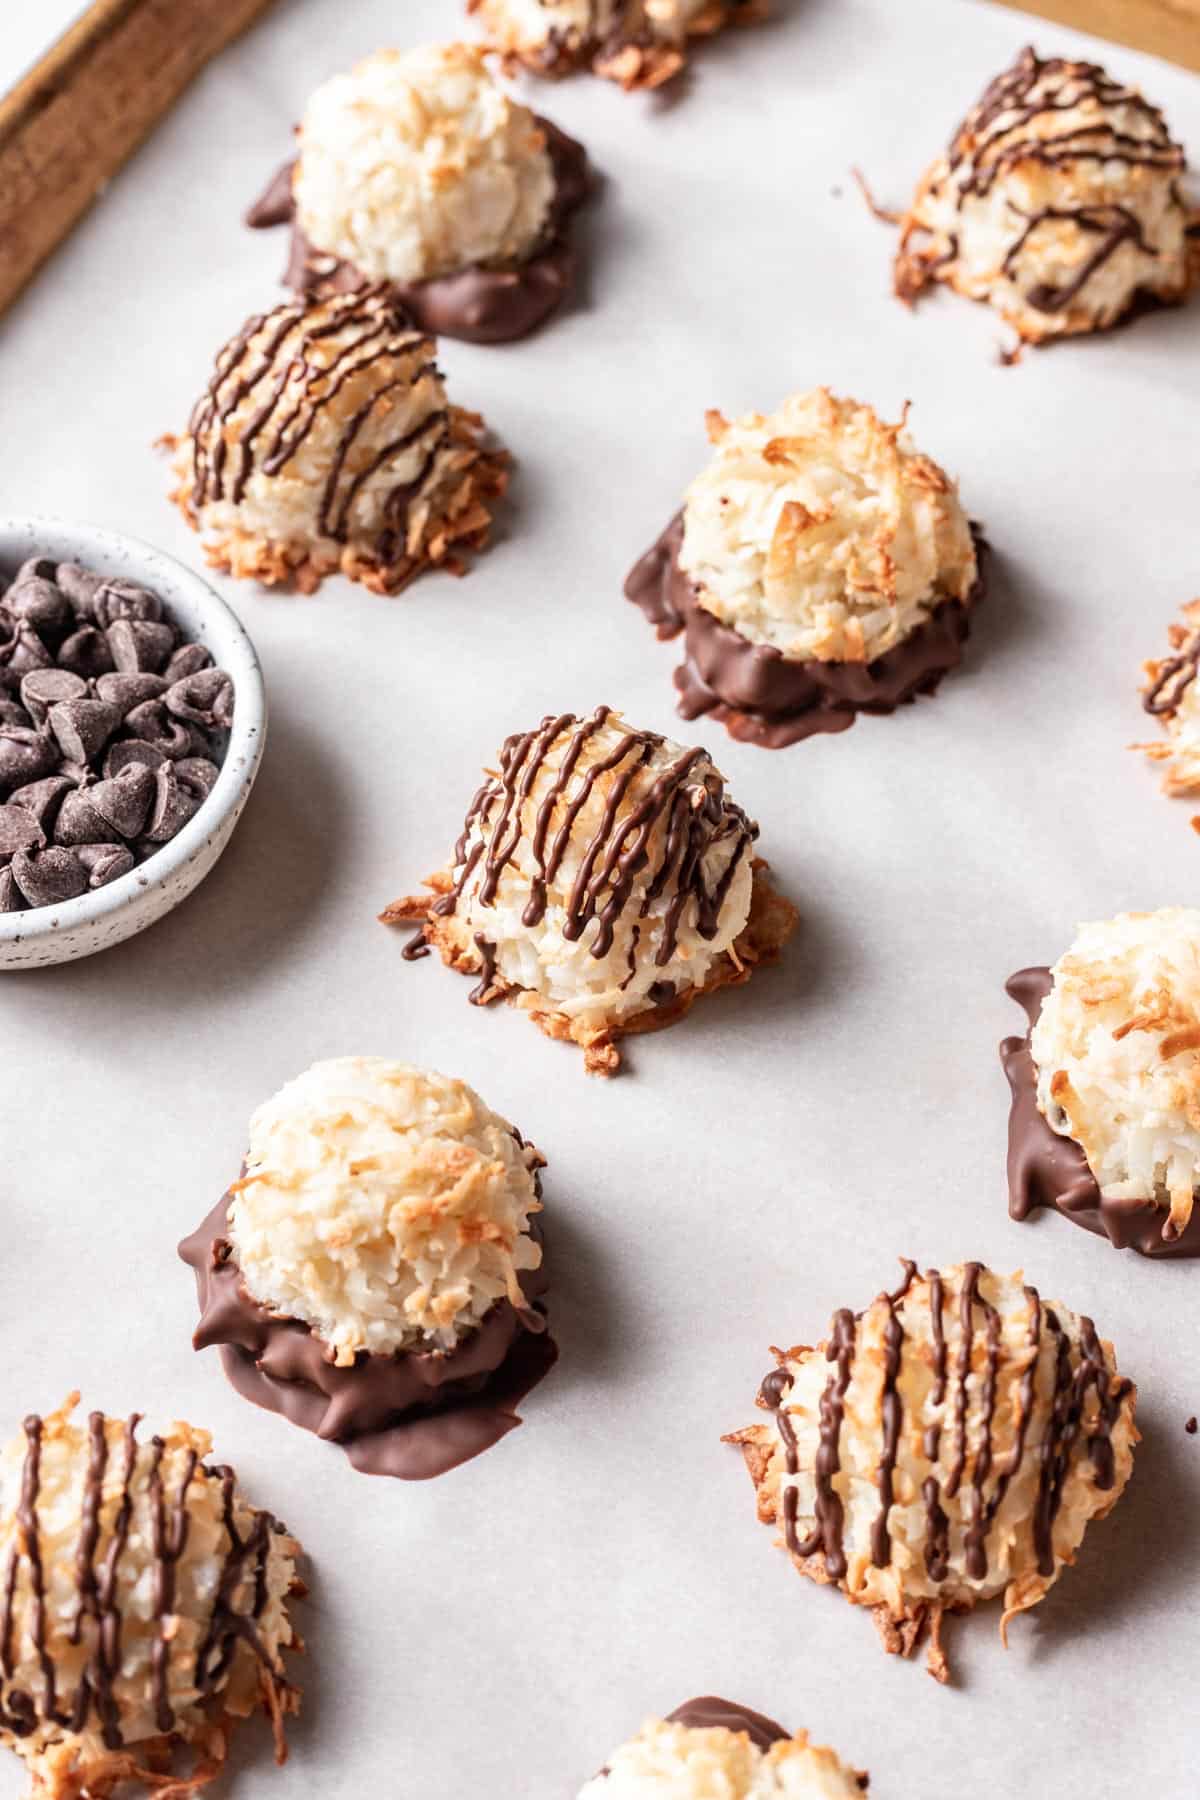 Coconut macaroons without condensed milk drizzled with chocolate on a baking sheet.